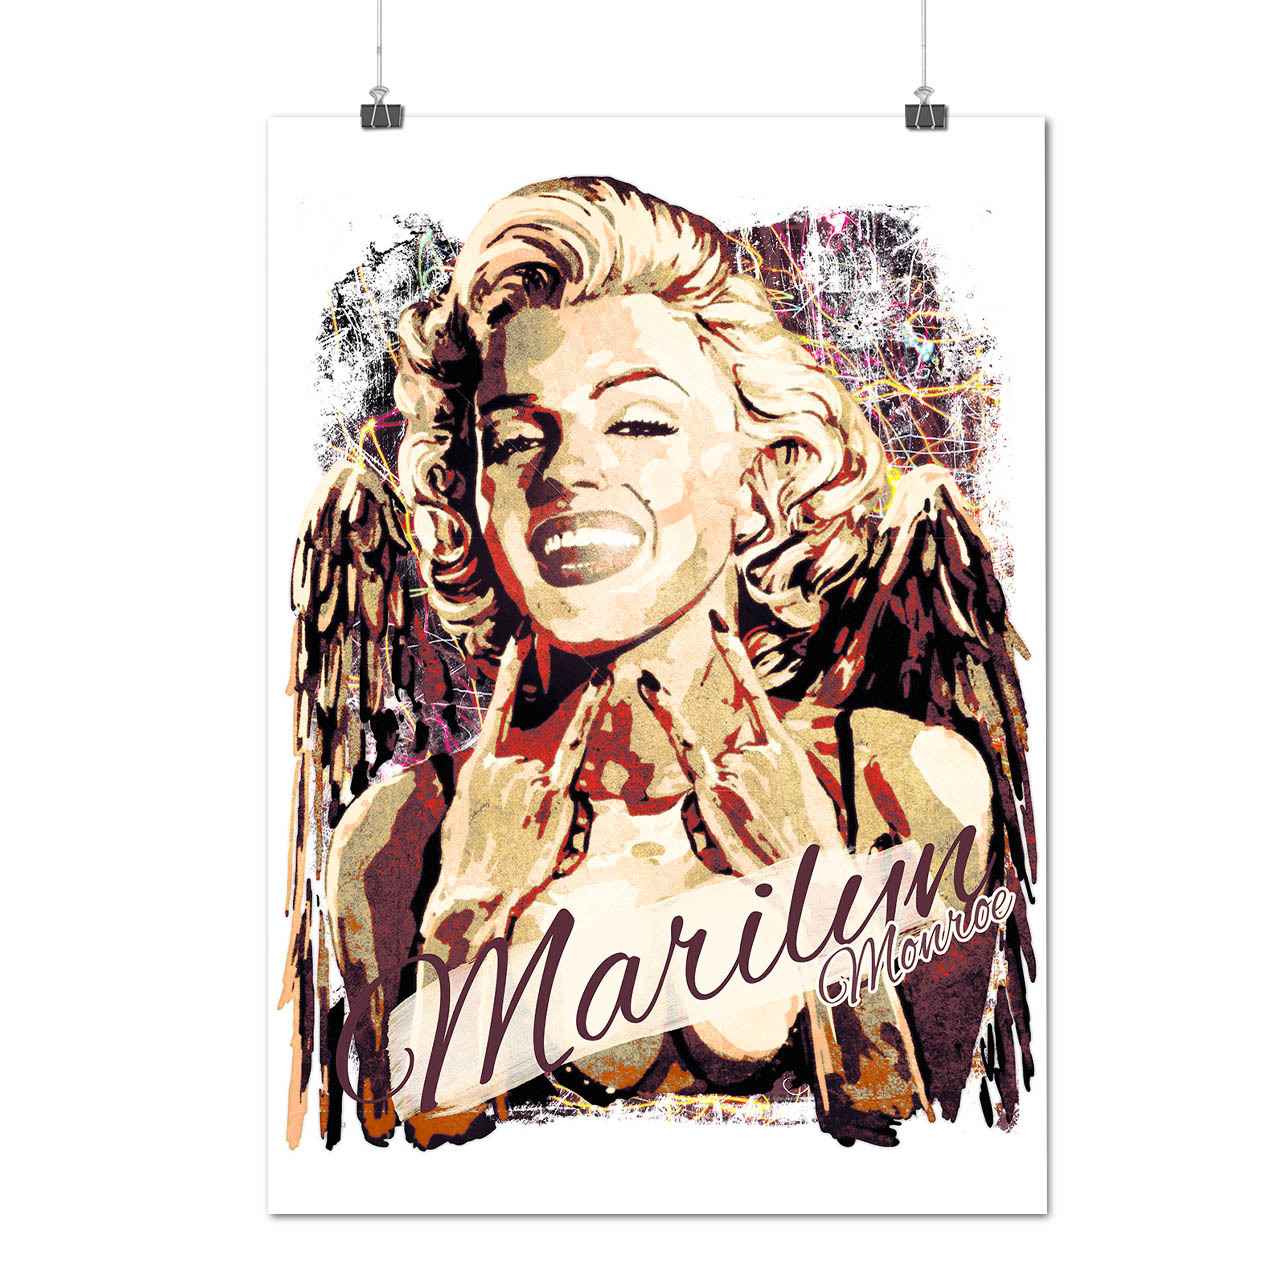 Marilyn Famous Celebrity Monroe Stage Matteglossy Poster A0 A1 A2 A3 A4 Wellc Art Posters 3969